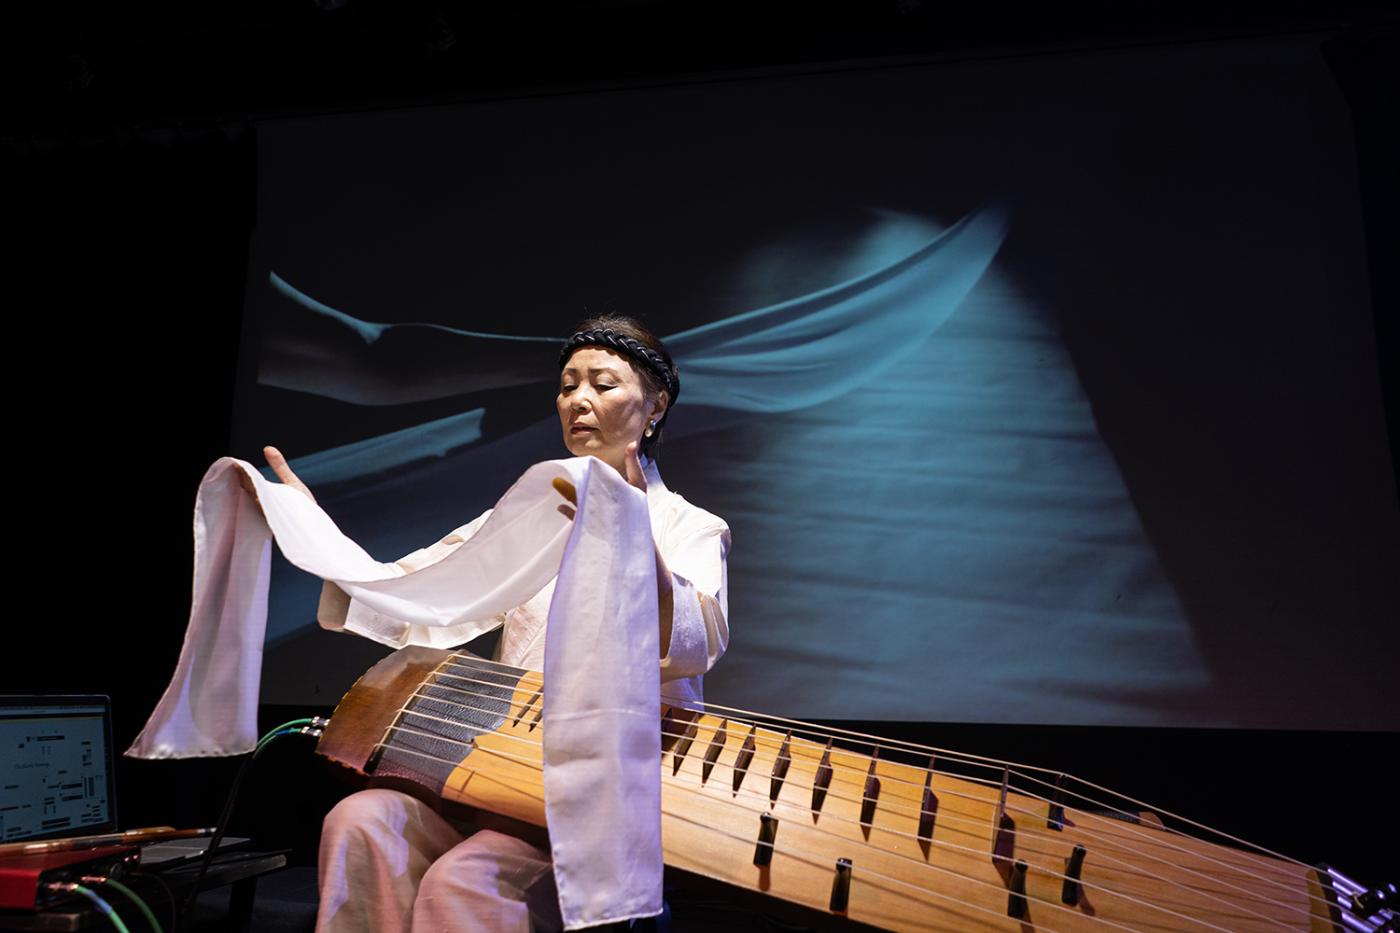 In stage lighting, Jin Hi holds up a white cloth over her komungo instrument.